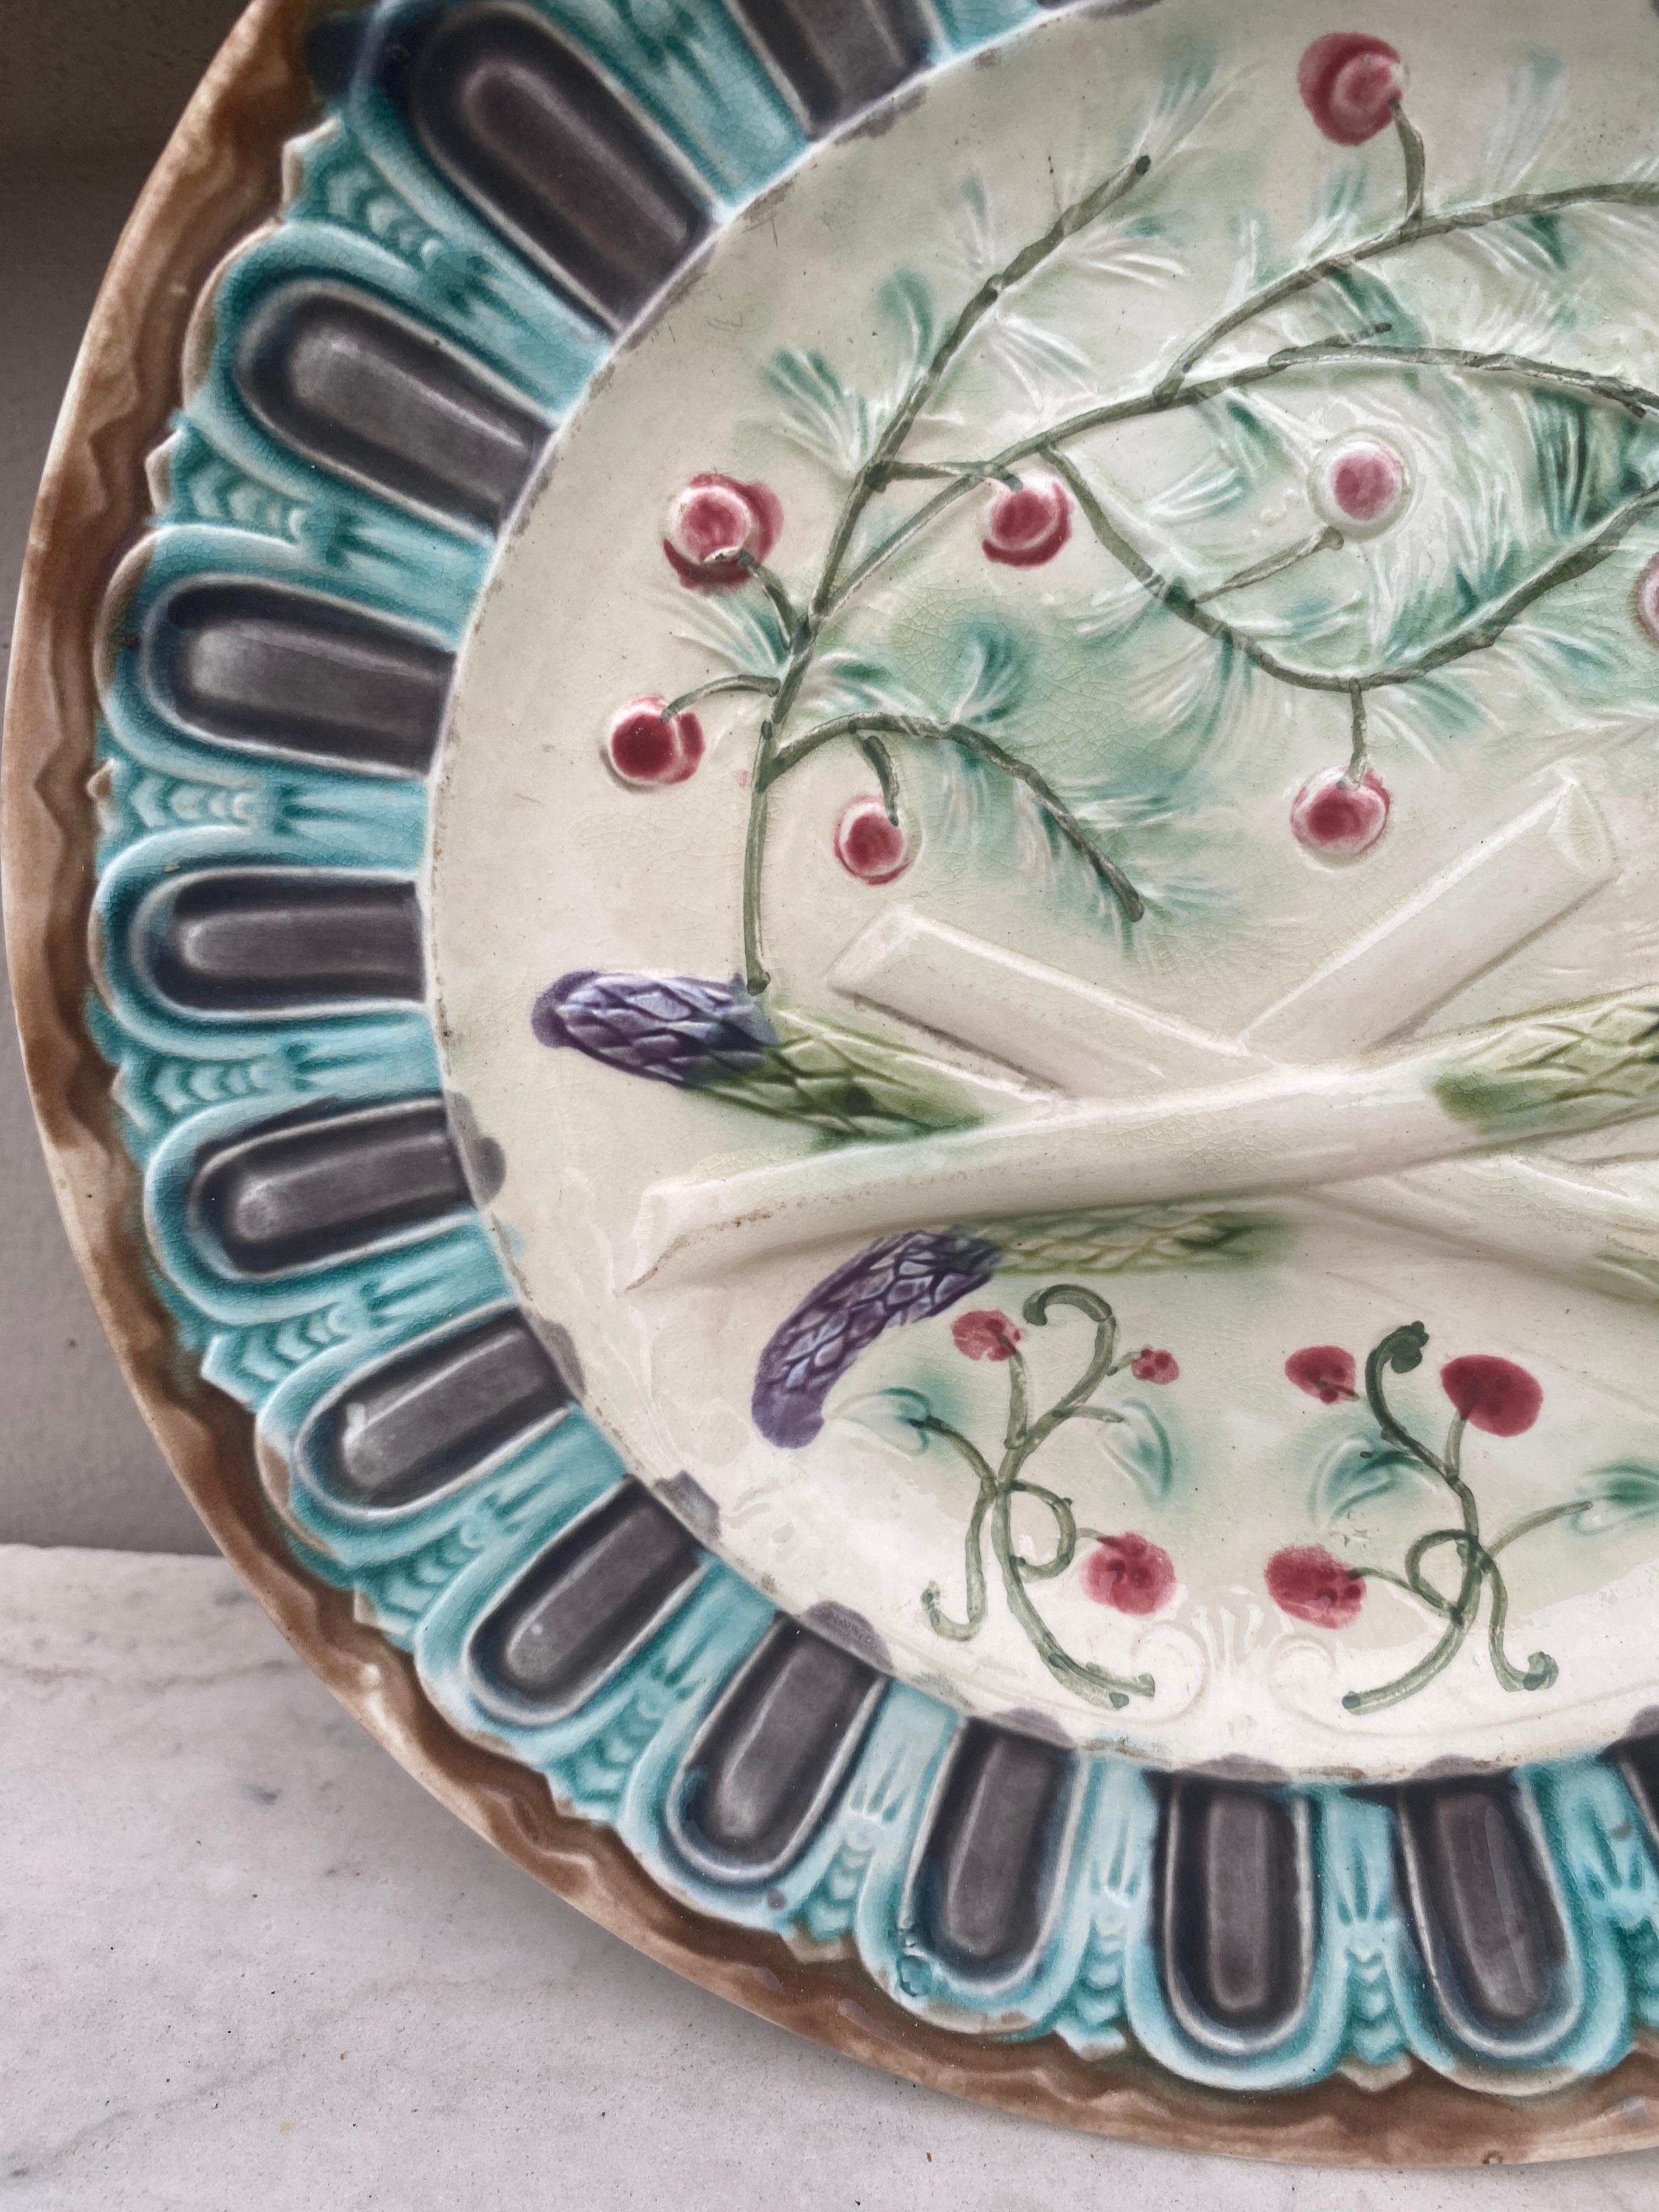 Unusual French Majolica asparagus plate attributed to Onnaing, circa 1890.
Decorated with berries.